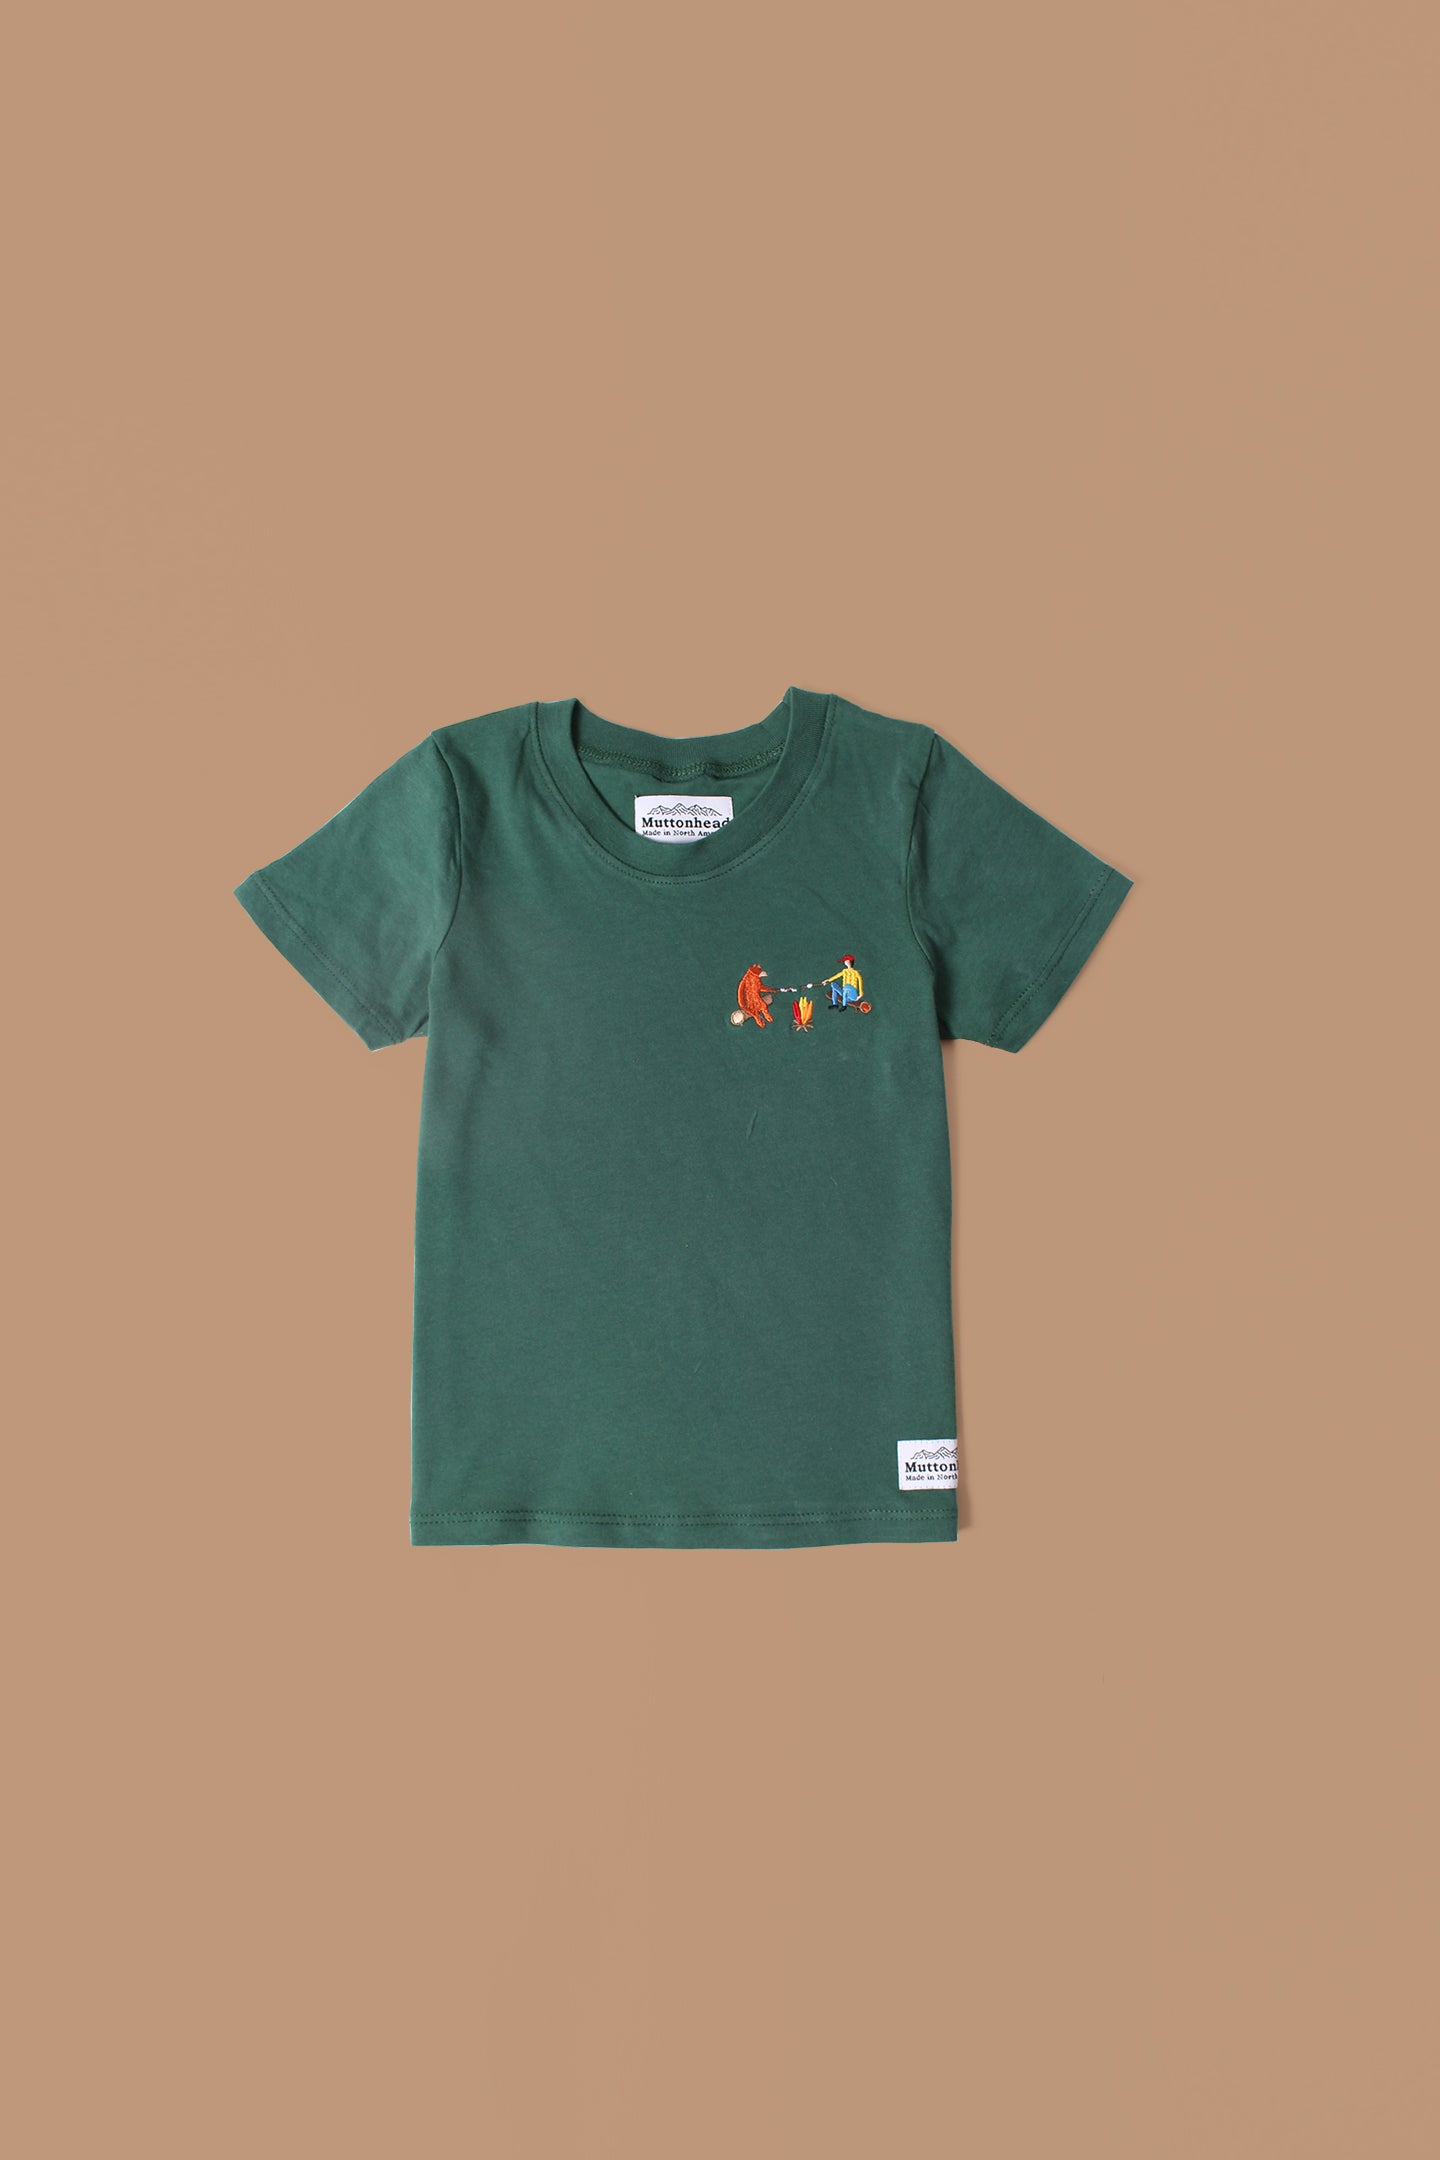 Baby/Kids Tee - Forest - Campfire Friends - CAMP Series